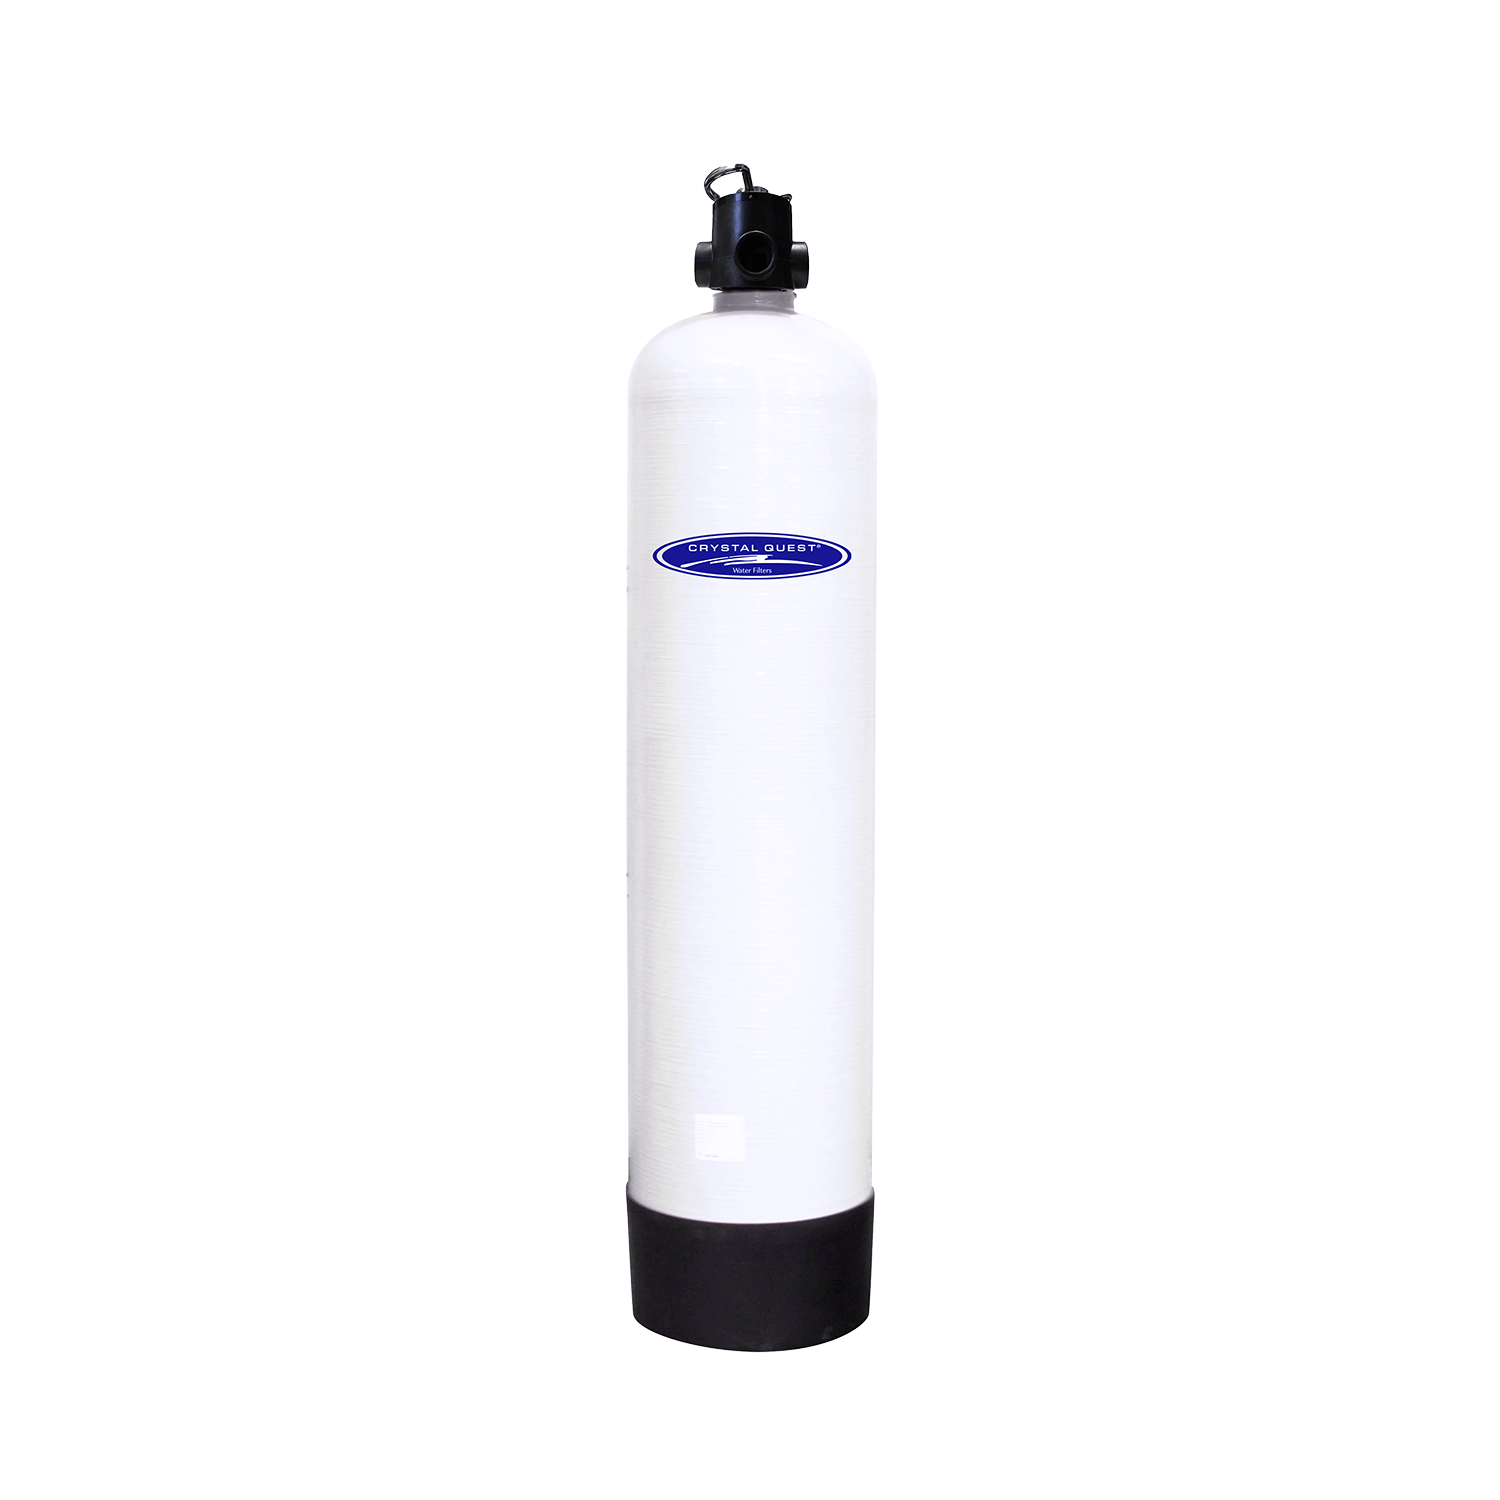 20 GPM / Manual (Downflow w/ Backwash) Granular Activated Carbon Water Filtration System - Commercial - Crystal Quest